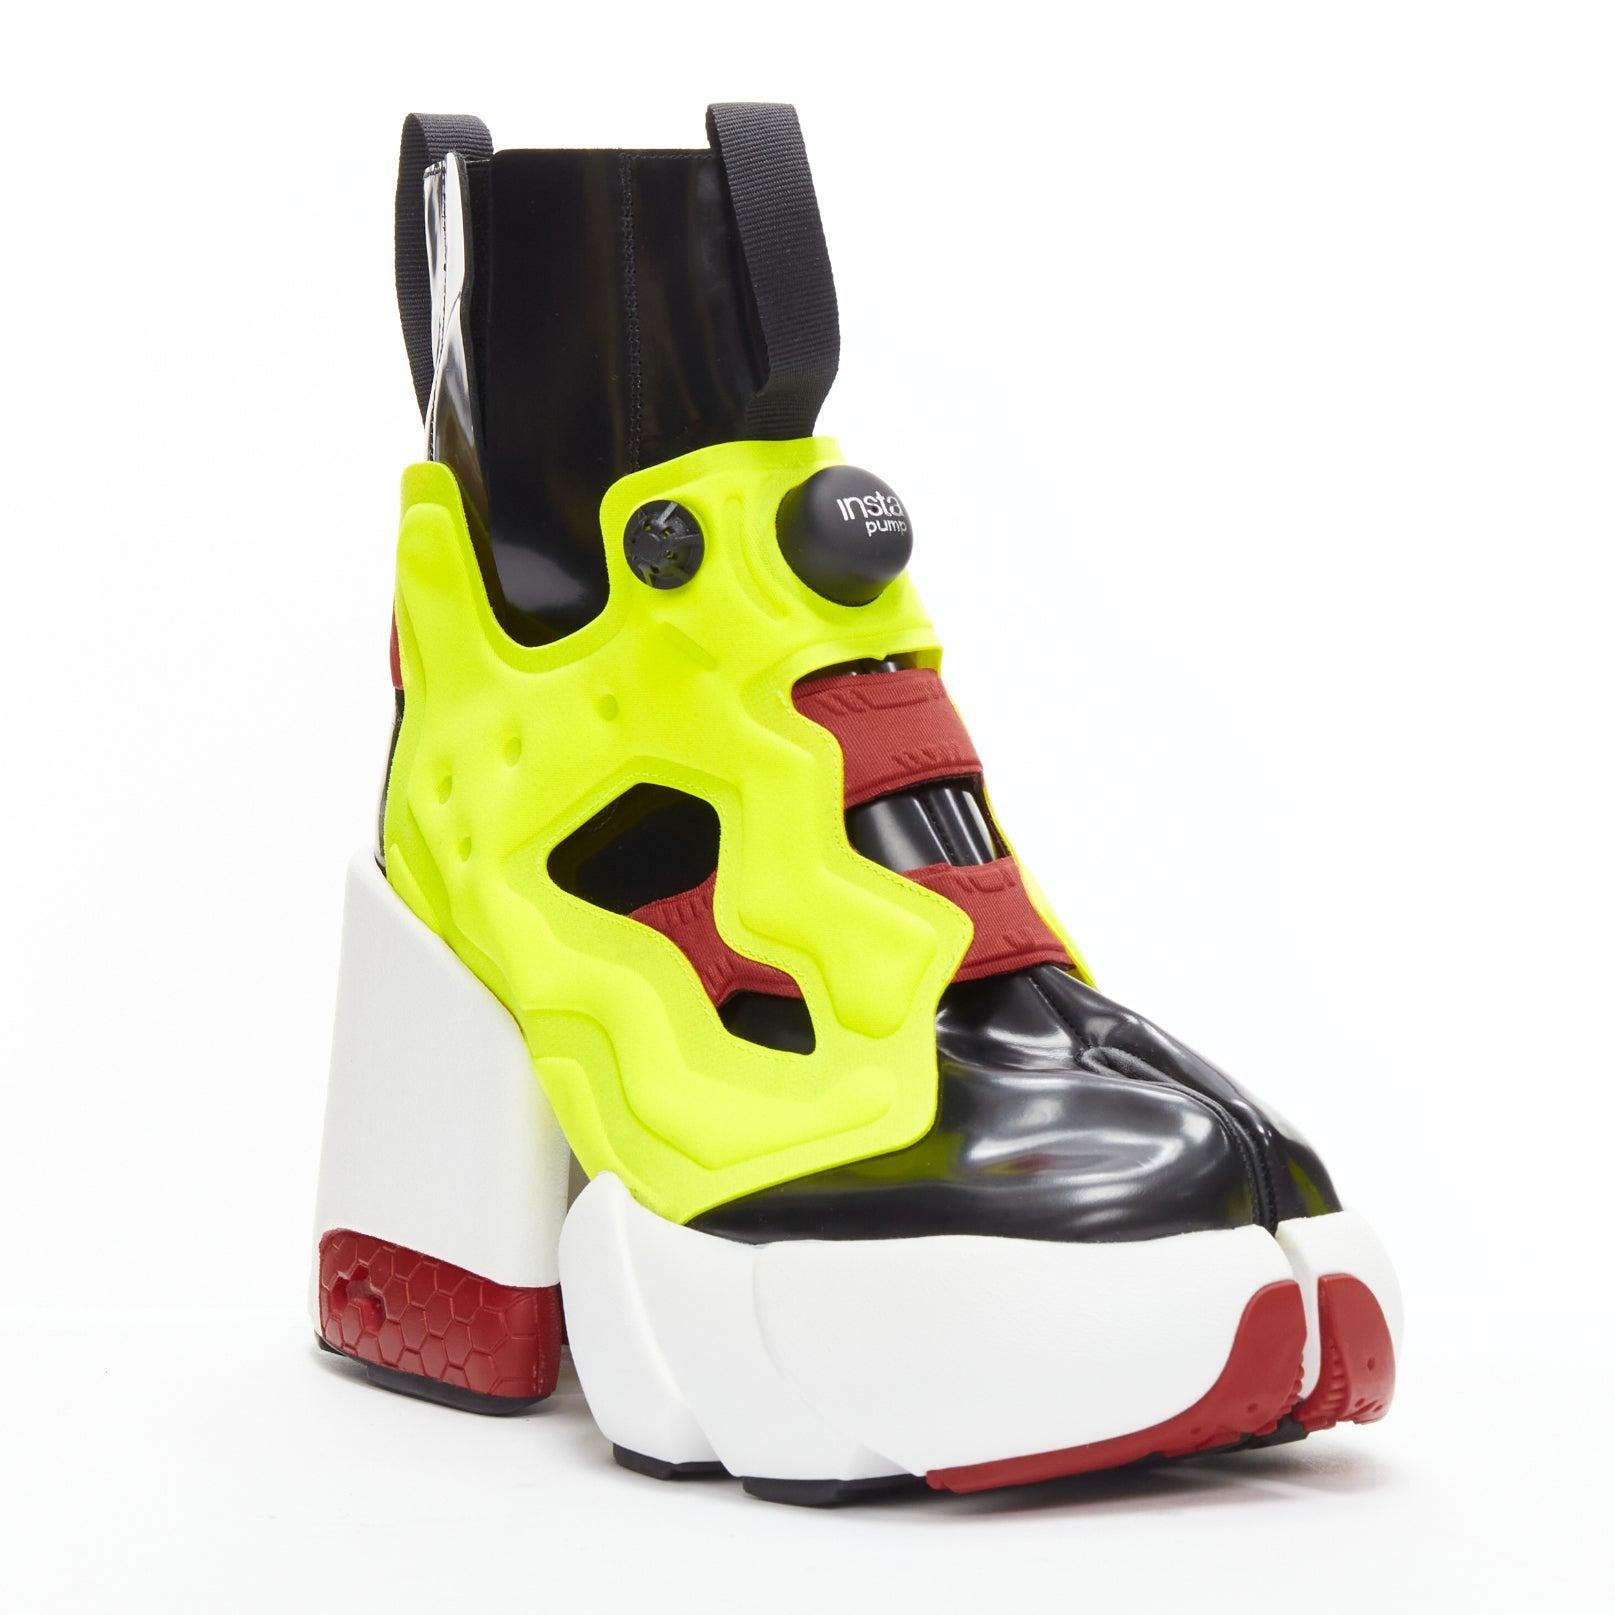 MAISON MARGIELA REEBOK Runway Tabi neon yellow red chunky boots EU39
Reference: TGAS/D00623
Brand: Maison Margiela
Designer: Martin Margiela
Collection: Reebok - Runway
Material: Leather, Fabric, Rubber
Color: Neon Yellow, Black
Pattern: